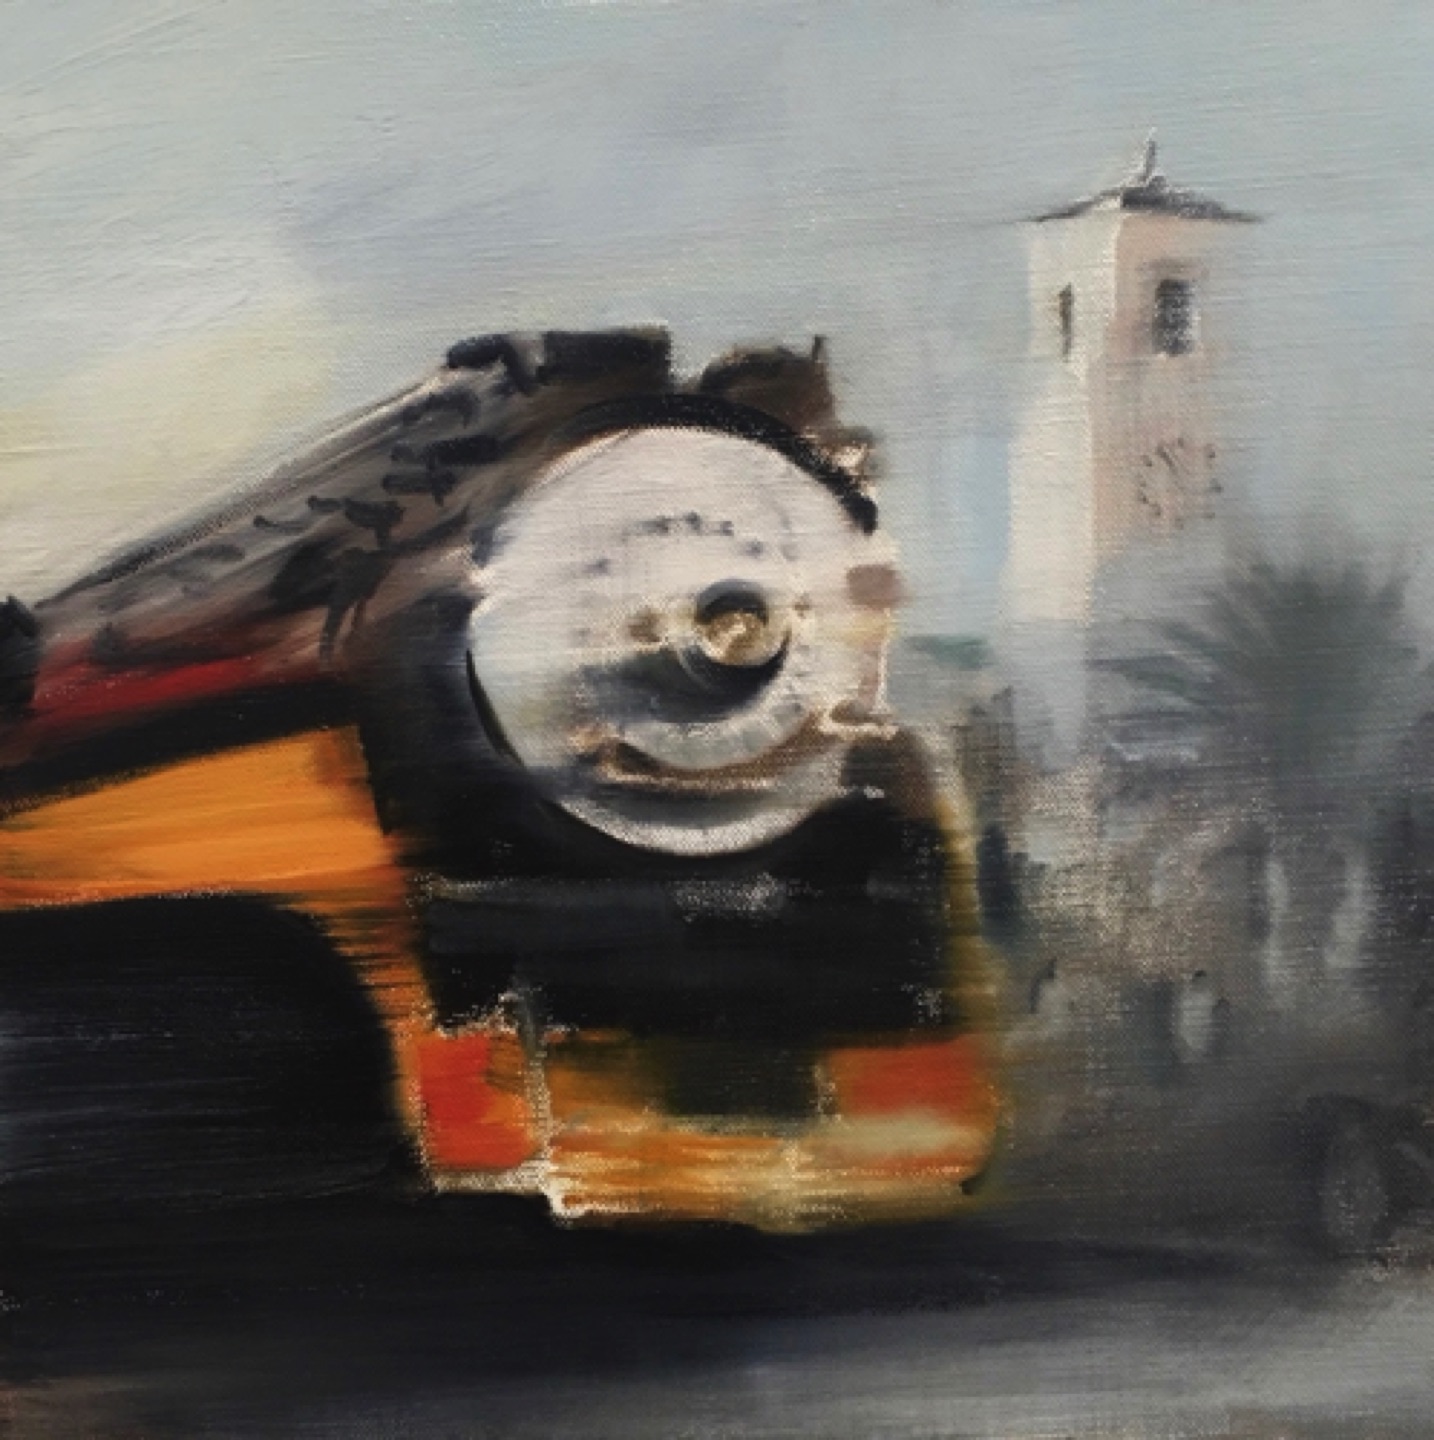 Gregg Chadwick
Southern Pacific Daylight (Union Station)
12"x12" oil on canvas 2018
Private Collection, San Francisco